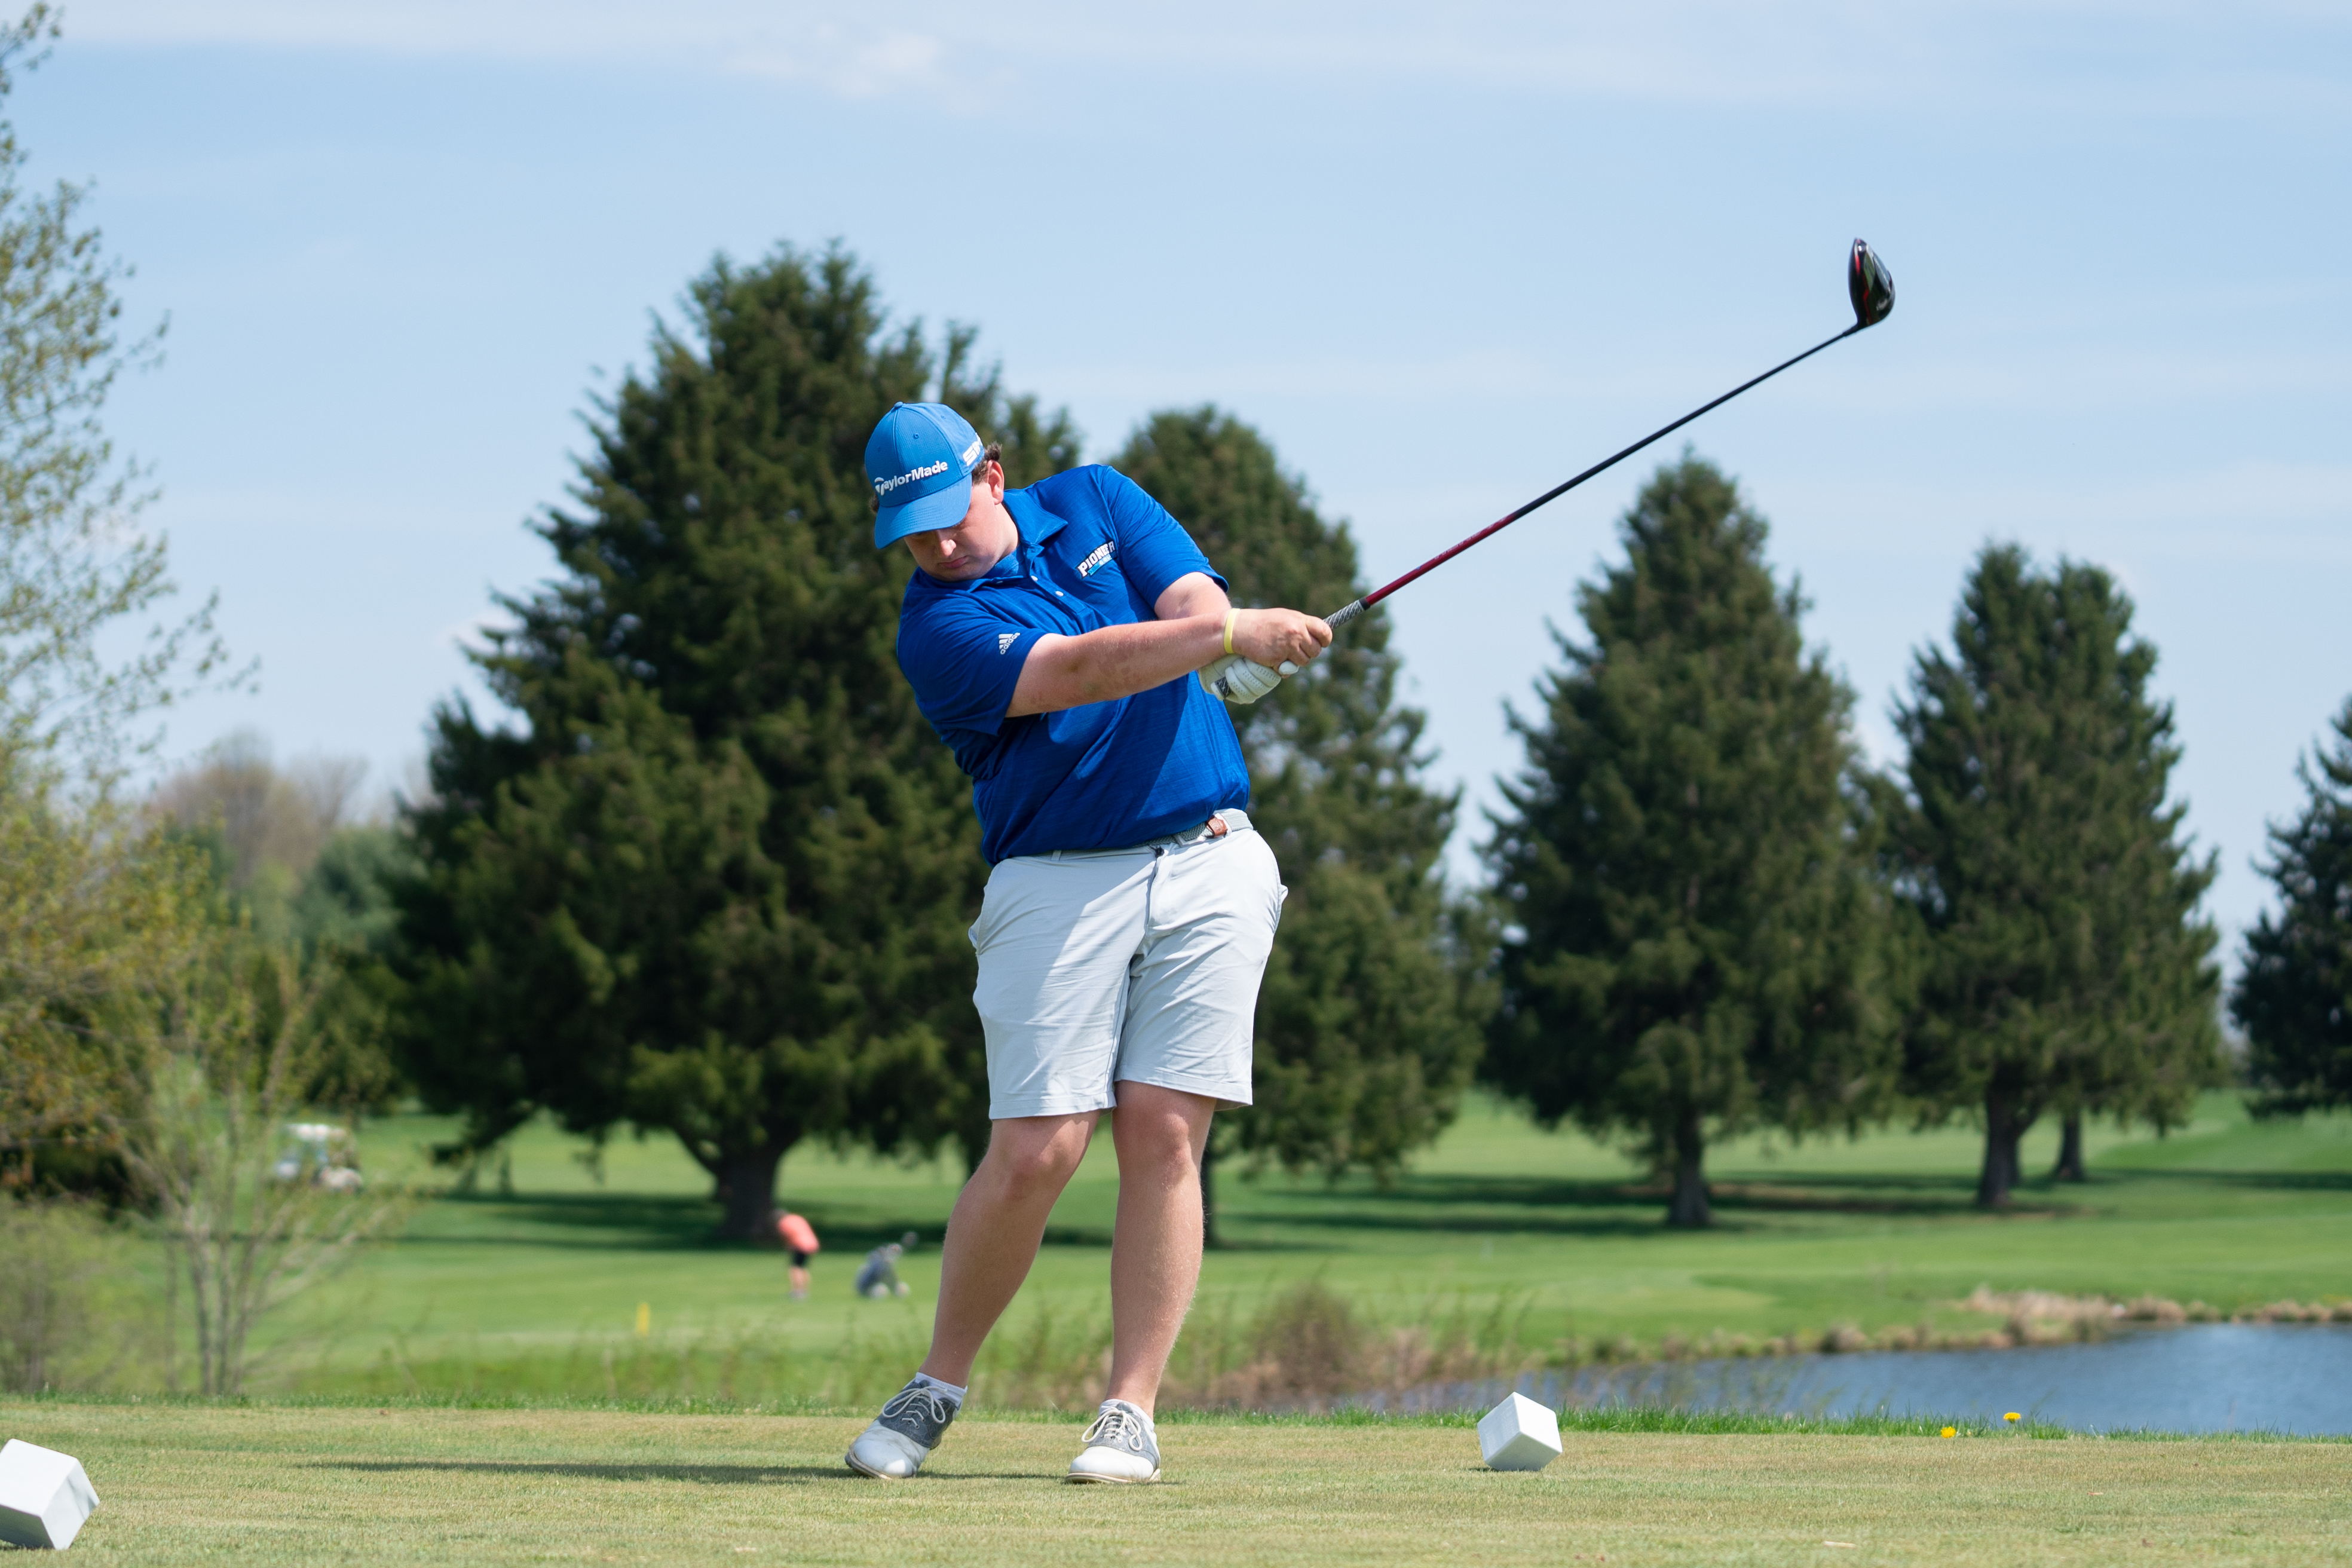 Liam Kosior, a sophomore on the Butler County Community College golf team, shot a 71 on Wednesday in the second round of the National Junior College Athletic Association Division III national championship tournament in Chautauqua, N.Y. The Neshannock High School graduate is among the 98 golfers competing for All-American status on the par-72 Chautauqua Golf Club Lake Course. Kosior is shown in a Friday, April 21, 2023, file photo at Lake Arthur Golf Club.